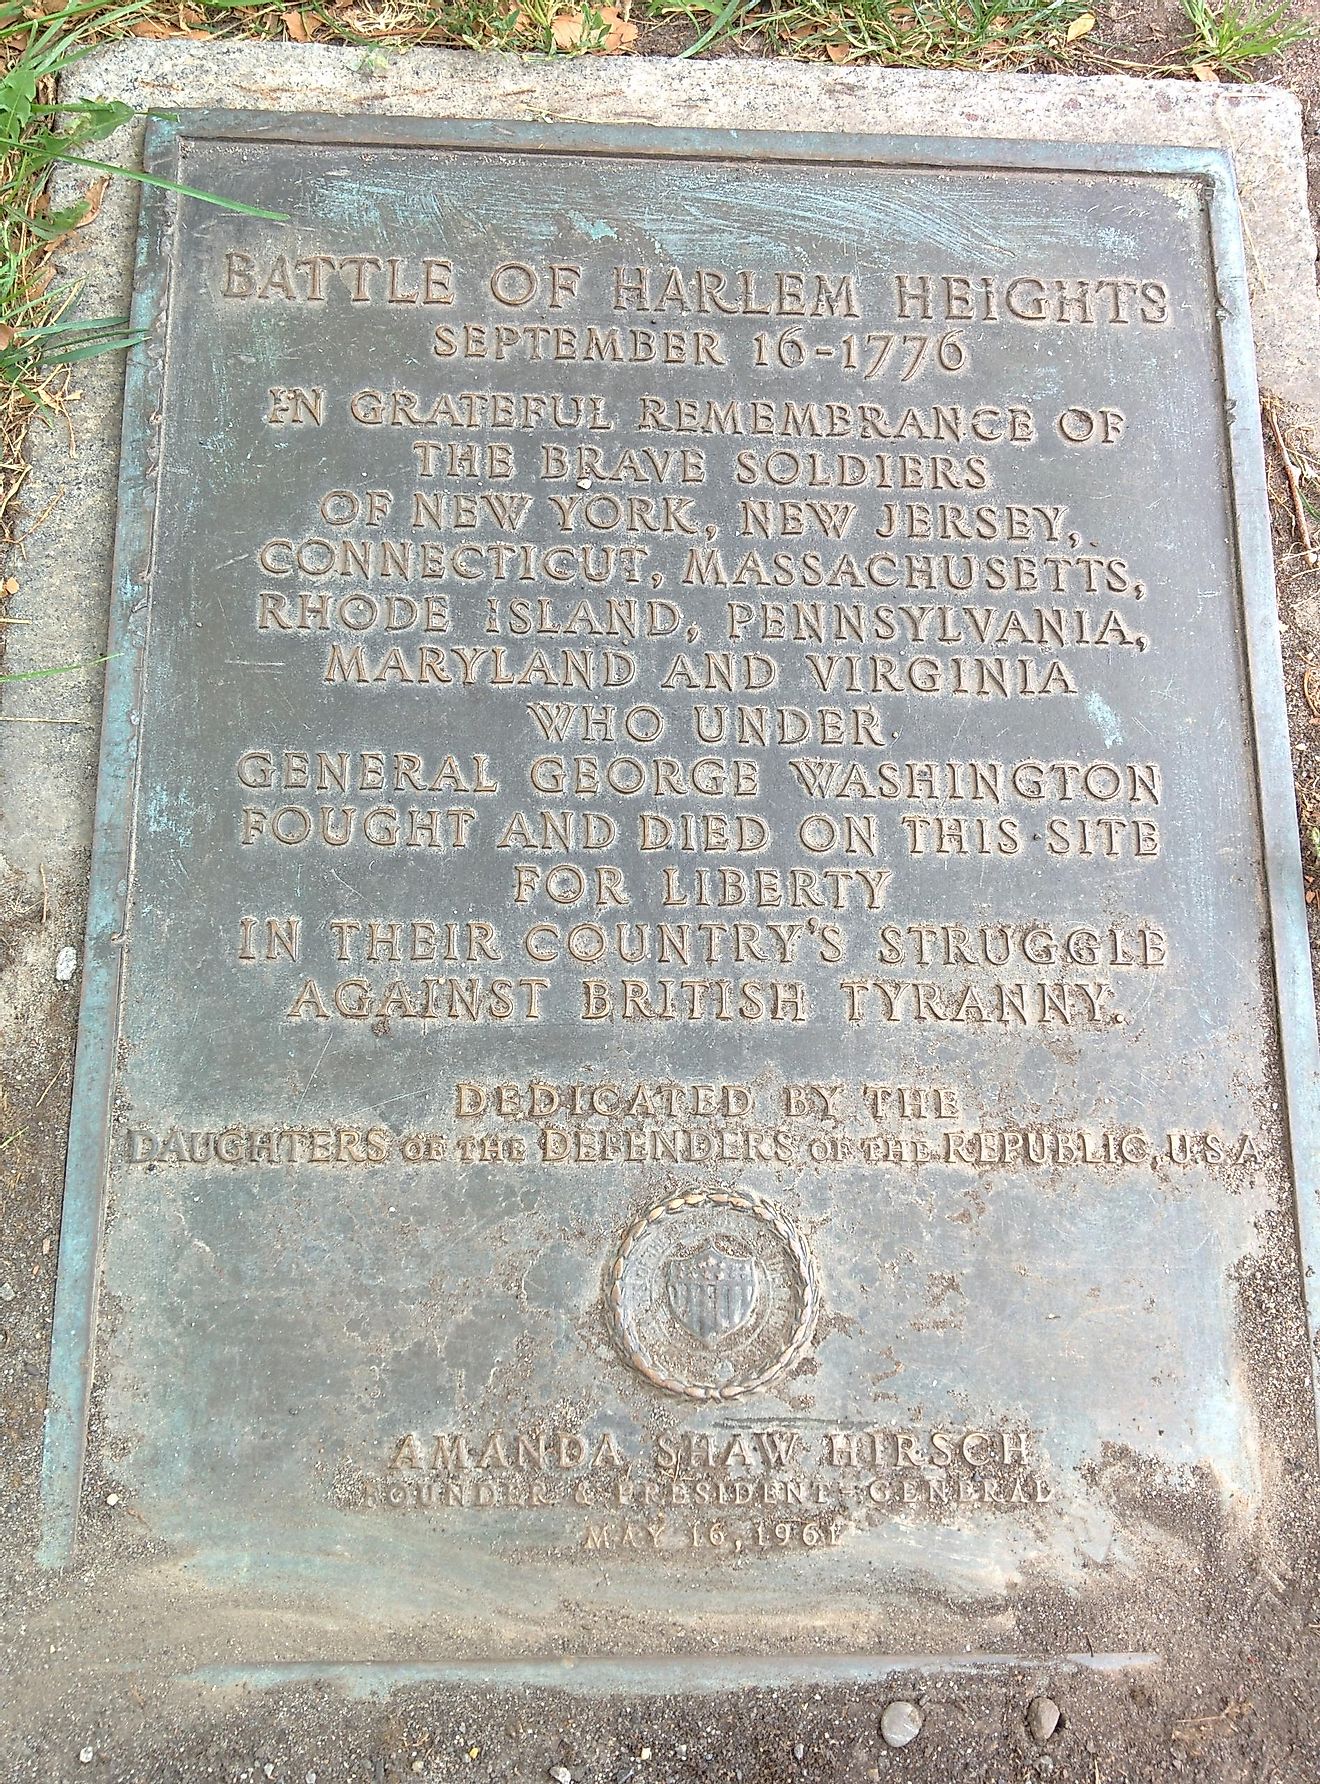 A plaque commemorating the victory at Harlem Heights 185 years after its original occurrence.